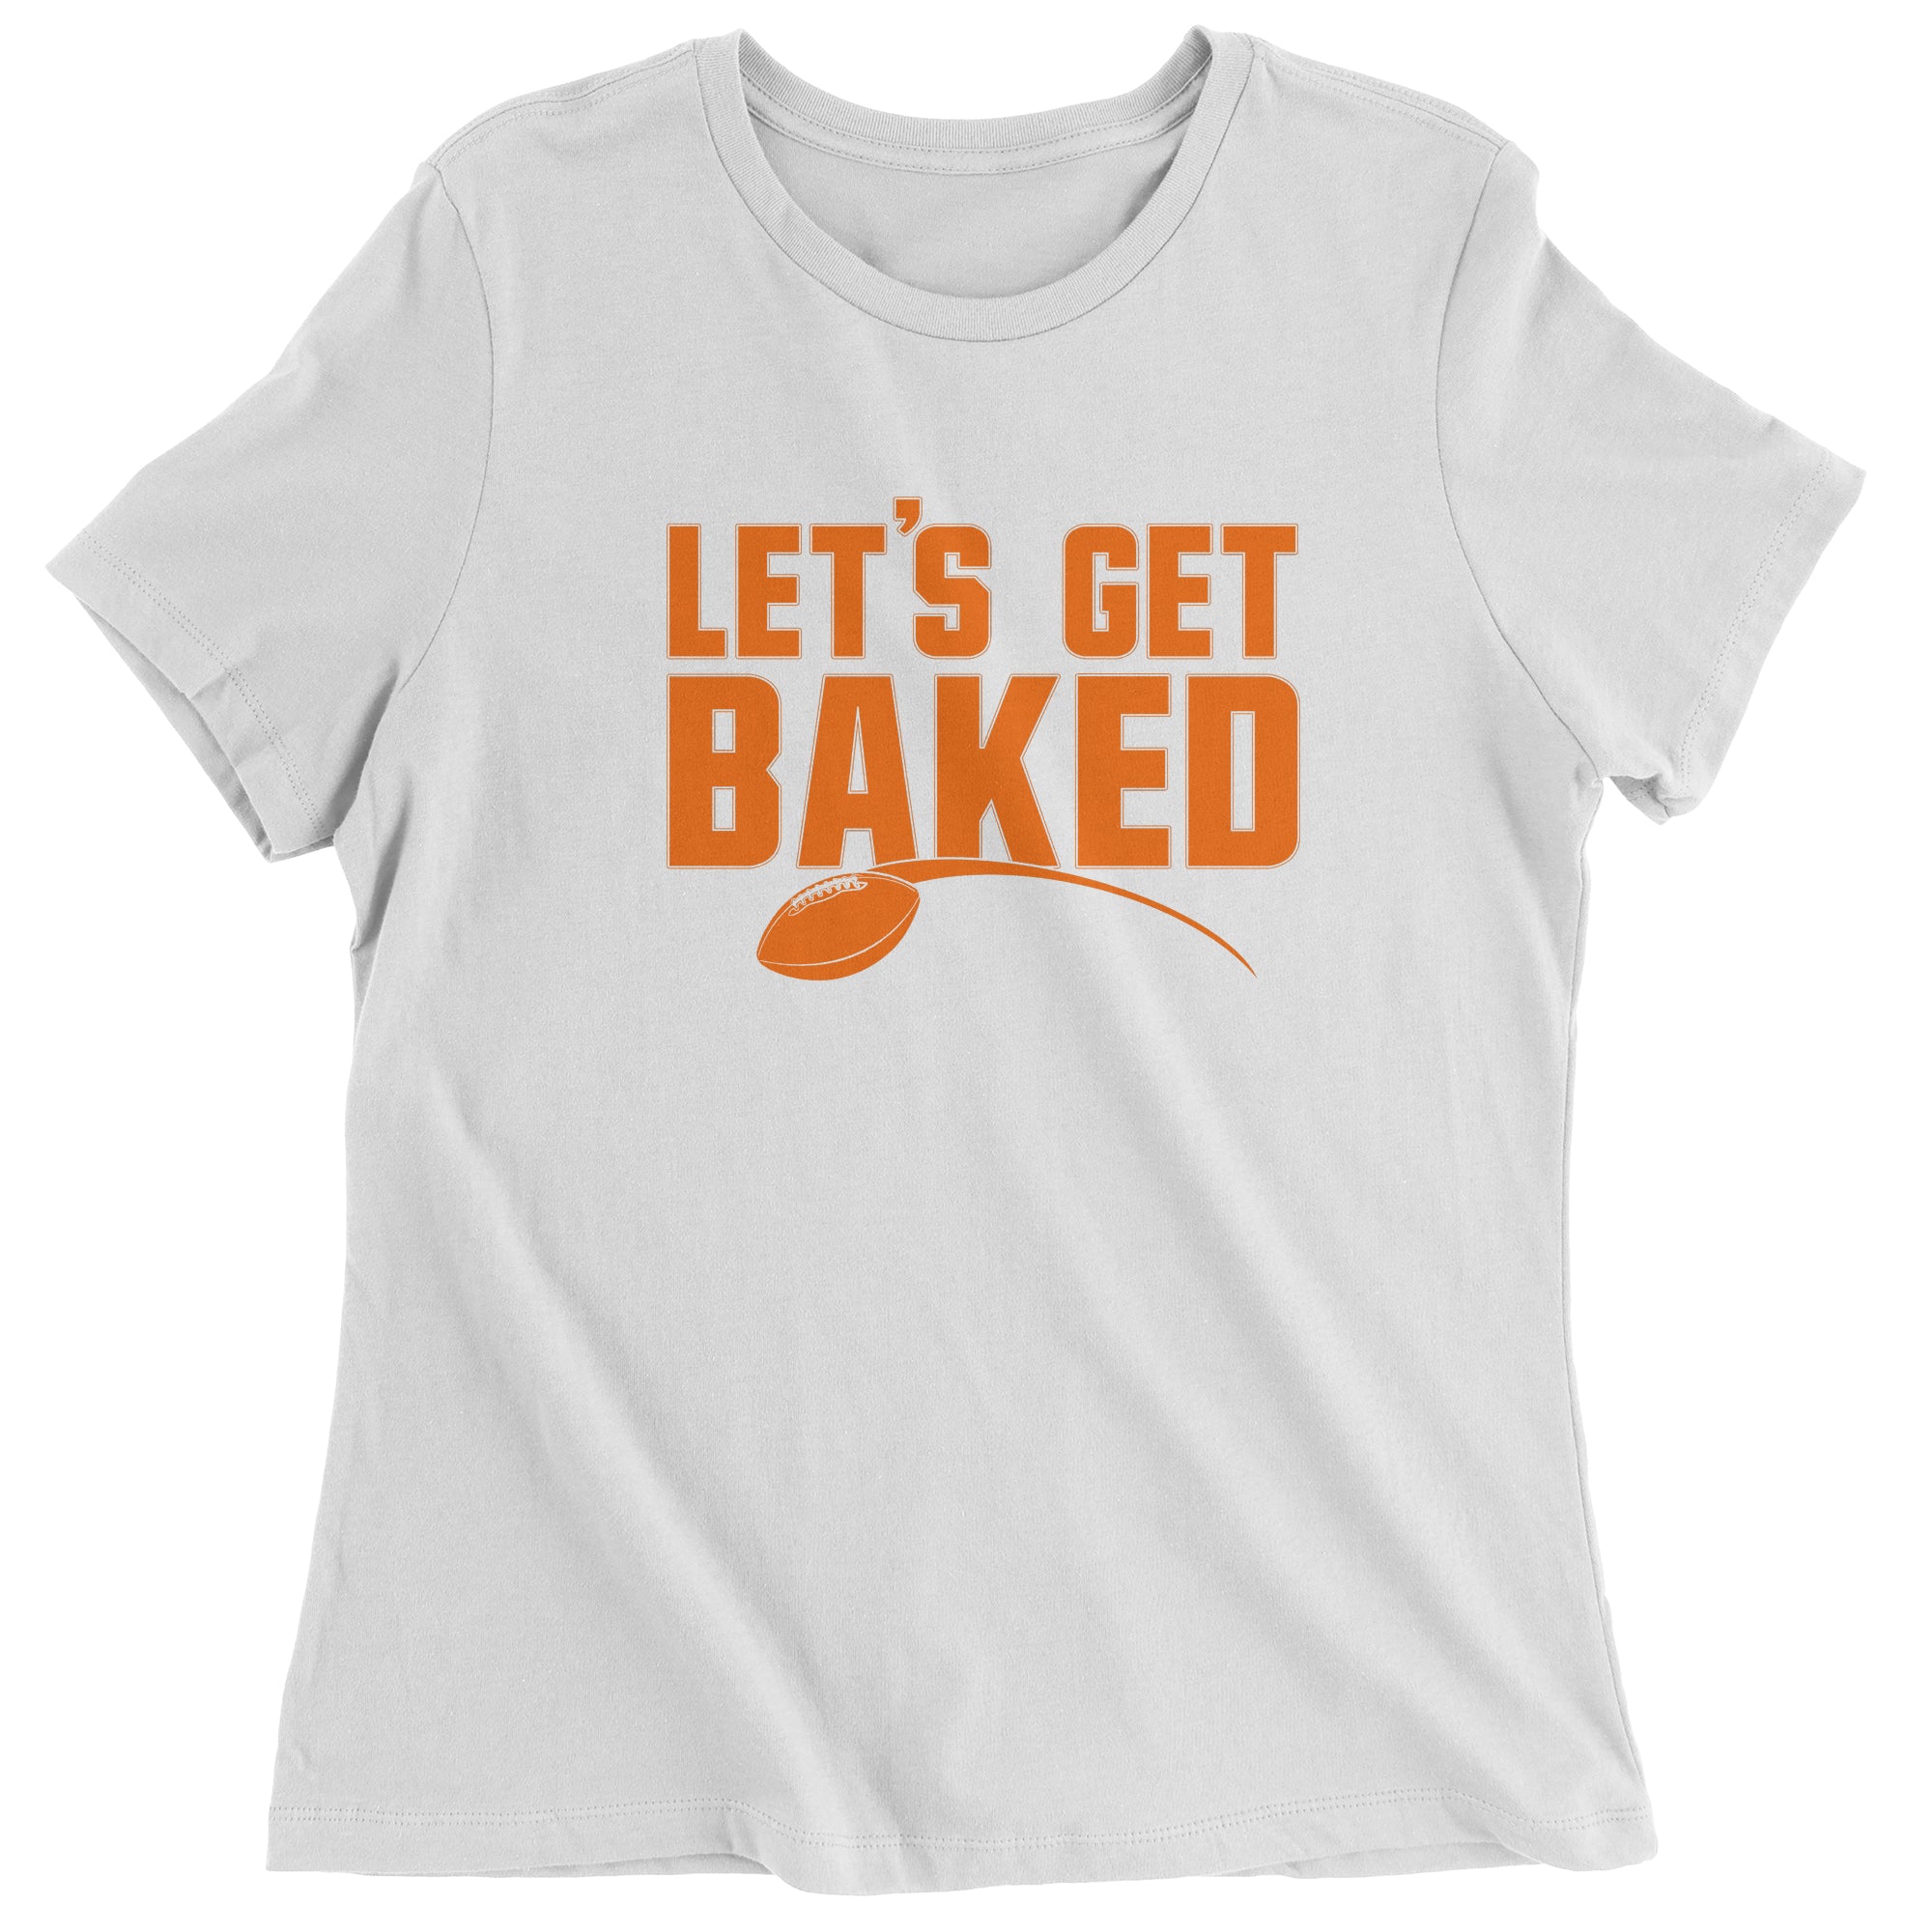 Let's Get Baked Mayfield Women's T-Shirt